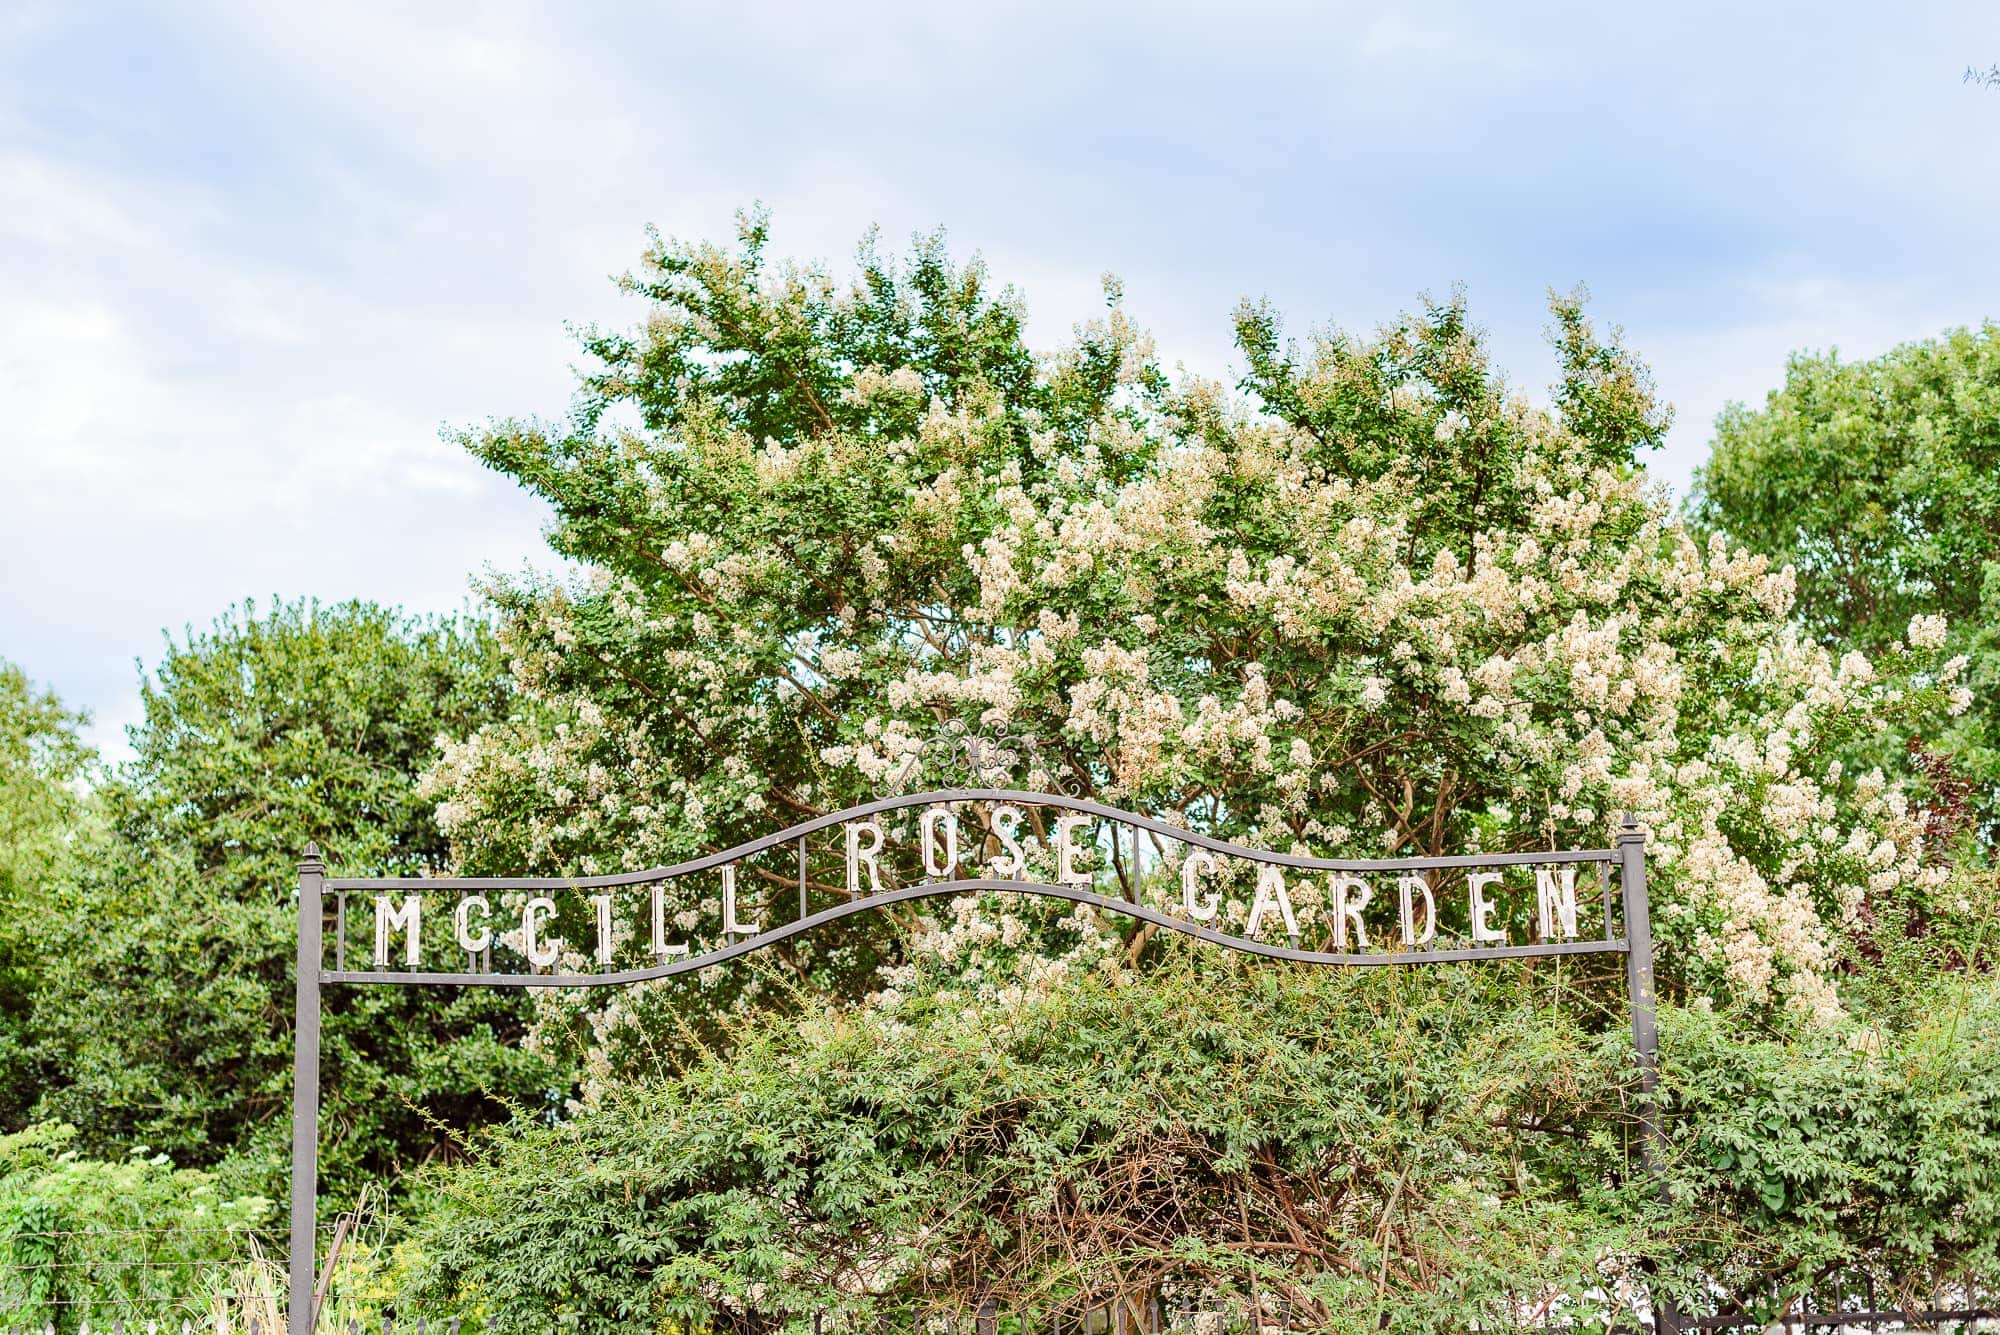 The sign at the entrance to the Charlotte rose garden reads McGill Rose Garden.